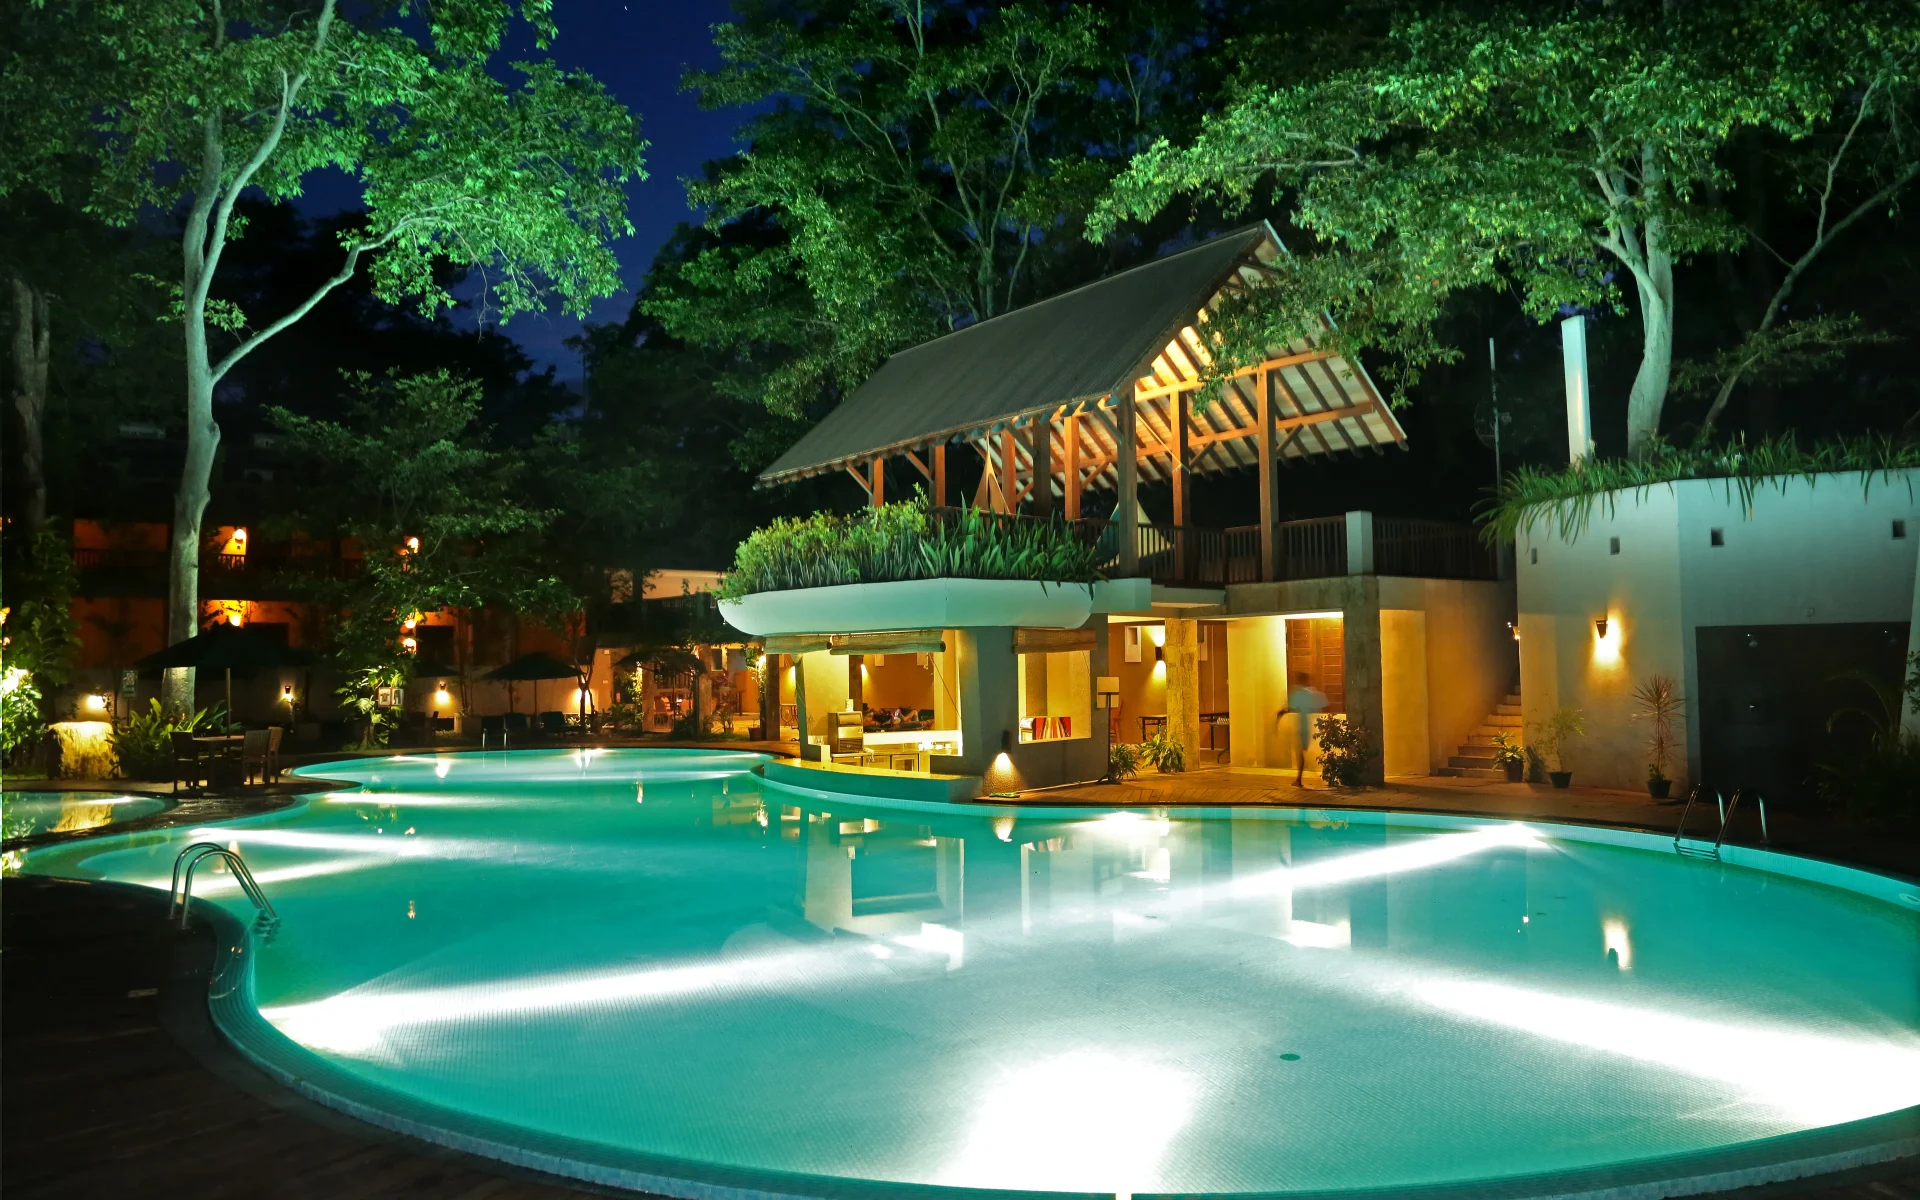 The main outdoor pool is lit up during the evening hours, encased by towering trees.